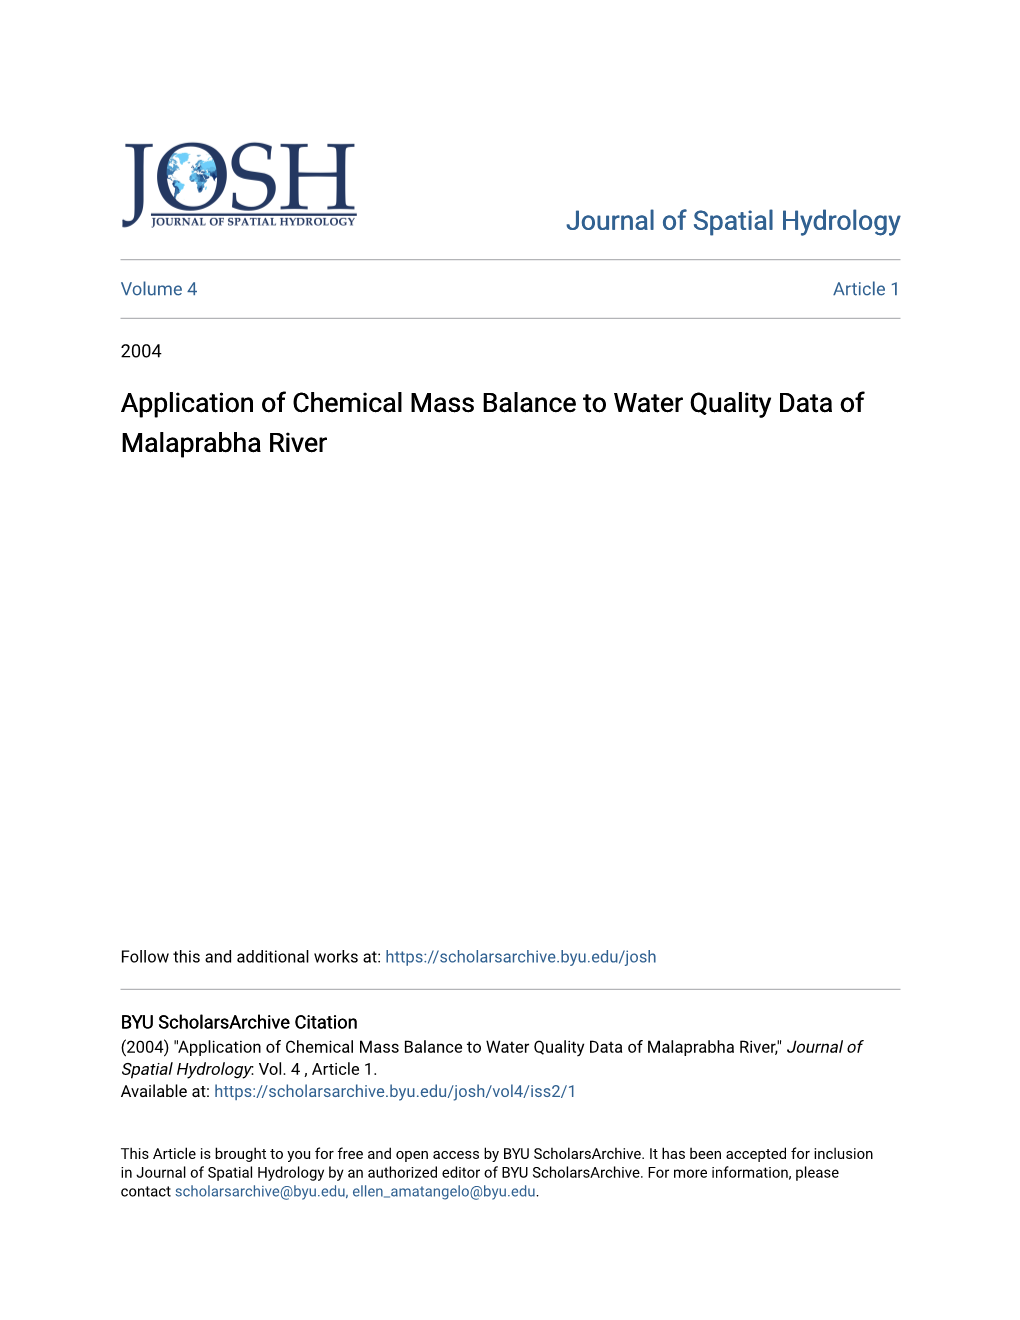 Application of Chemical Mass Balance to Water Quality Data of Malaprabha River